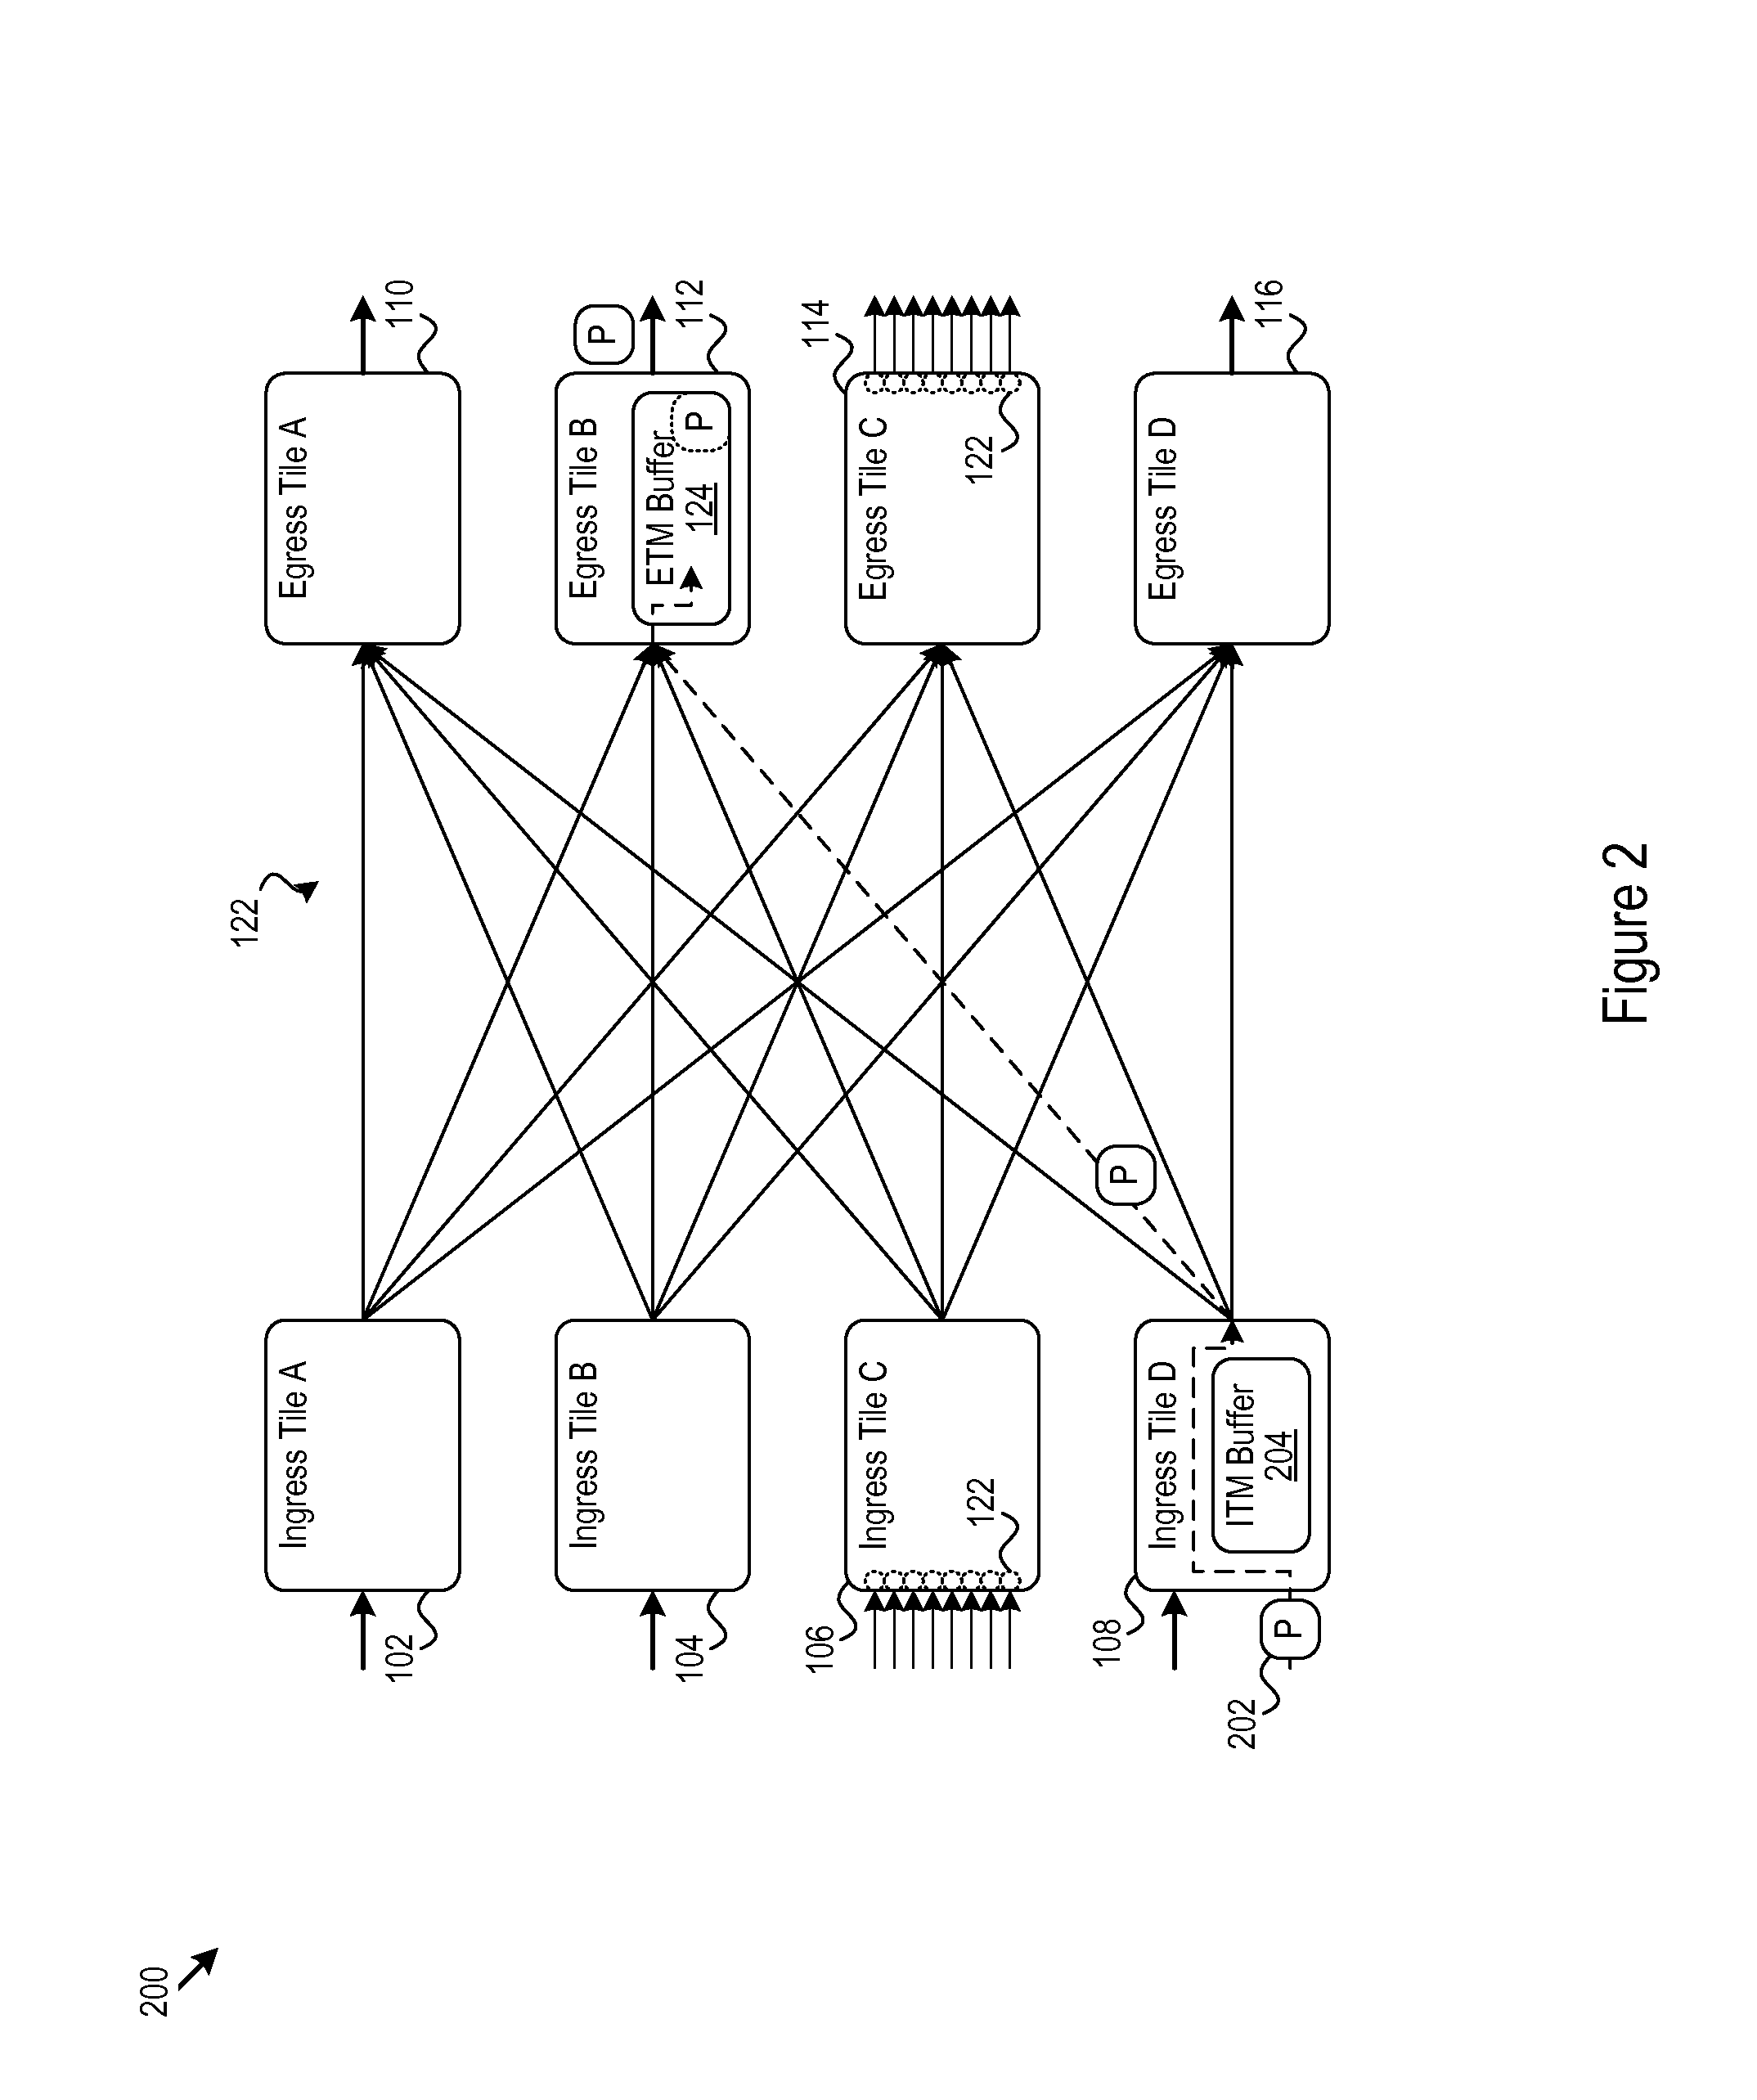 Internal Cut-Through For Distributed Switches